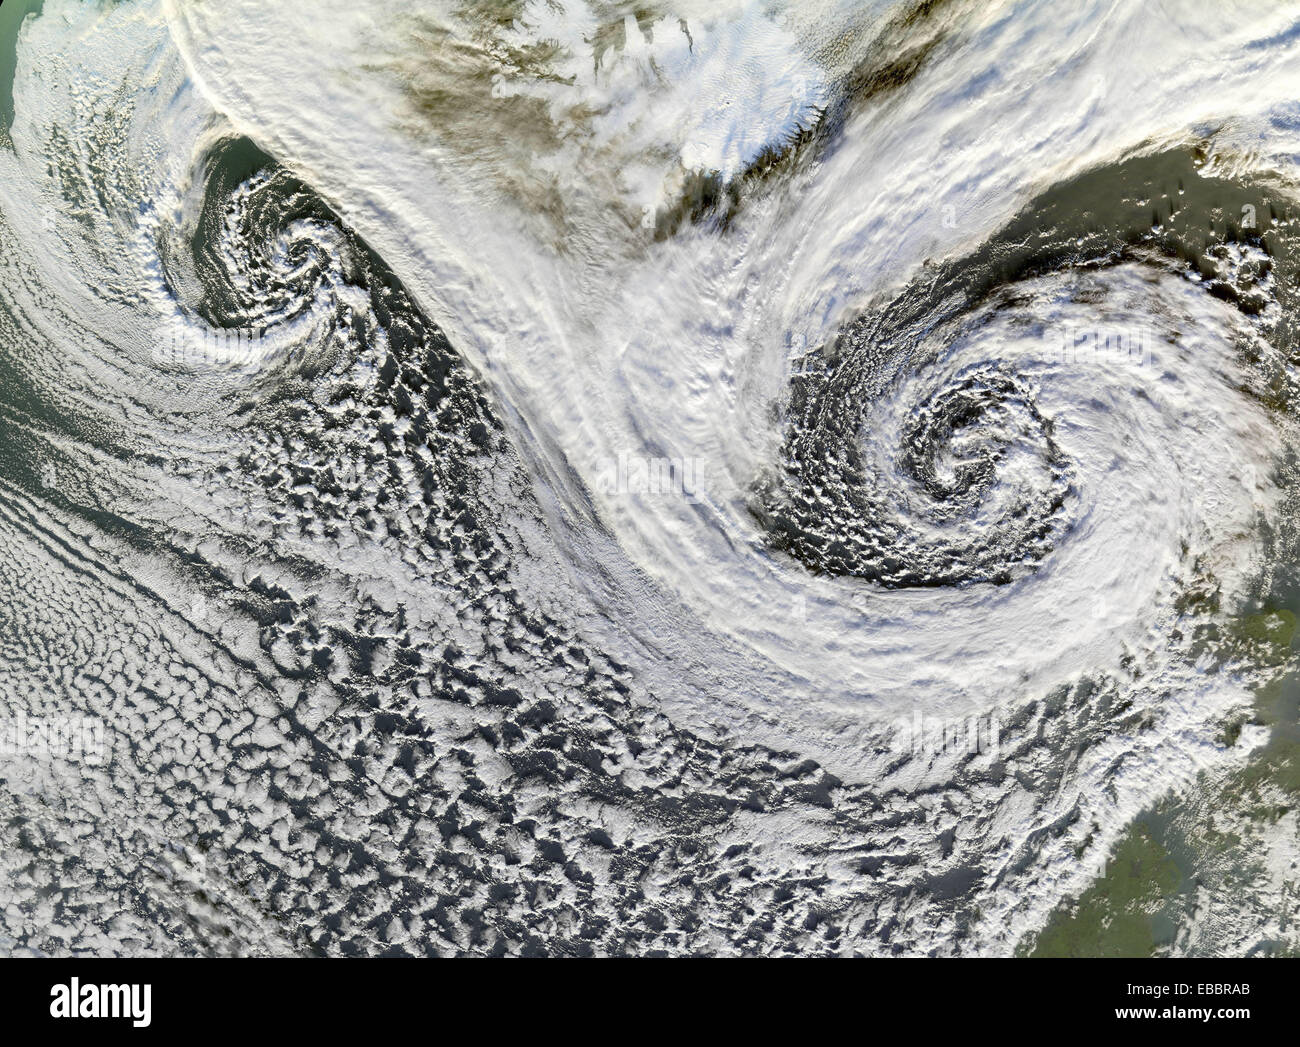 A cyclone is a low-pressure area of winds that spiral inwards. Although tropical storms most often come to mind, these Stock Photo